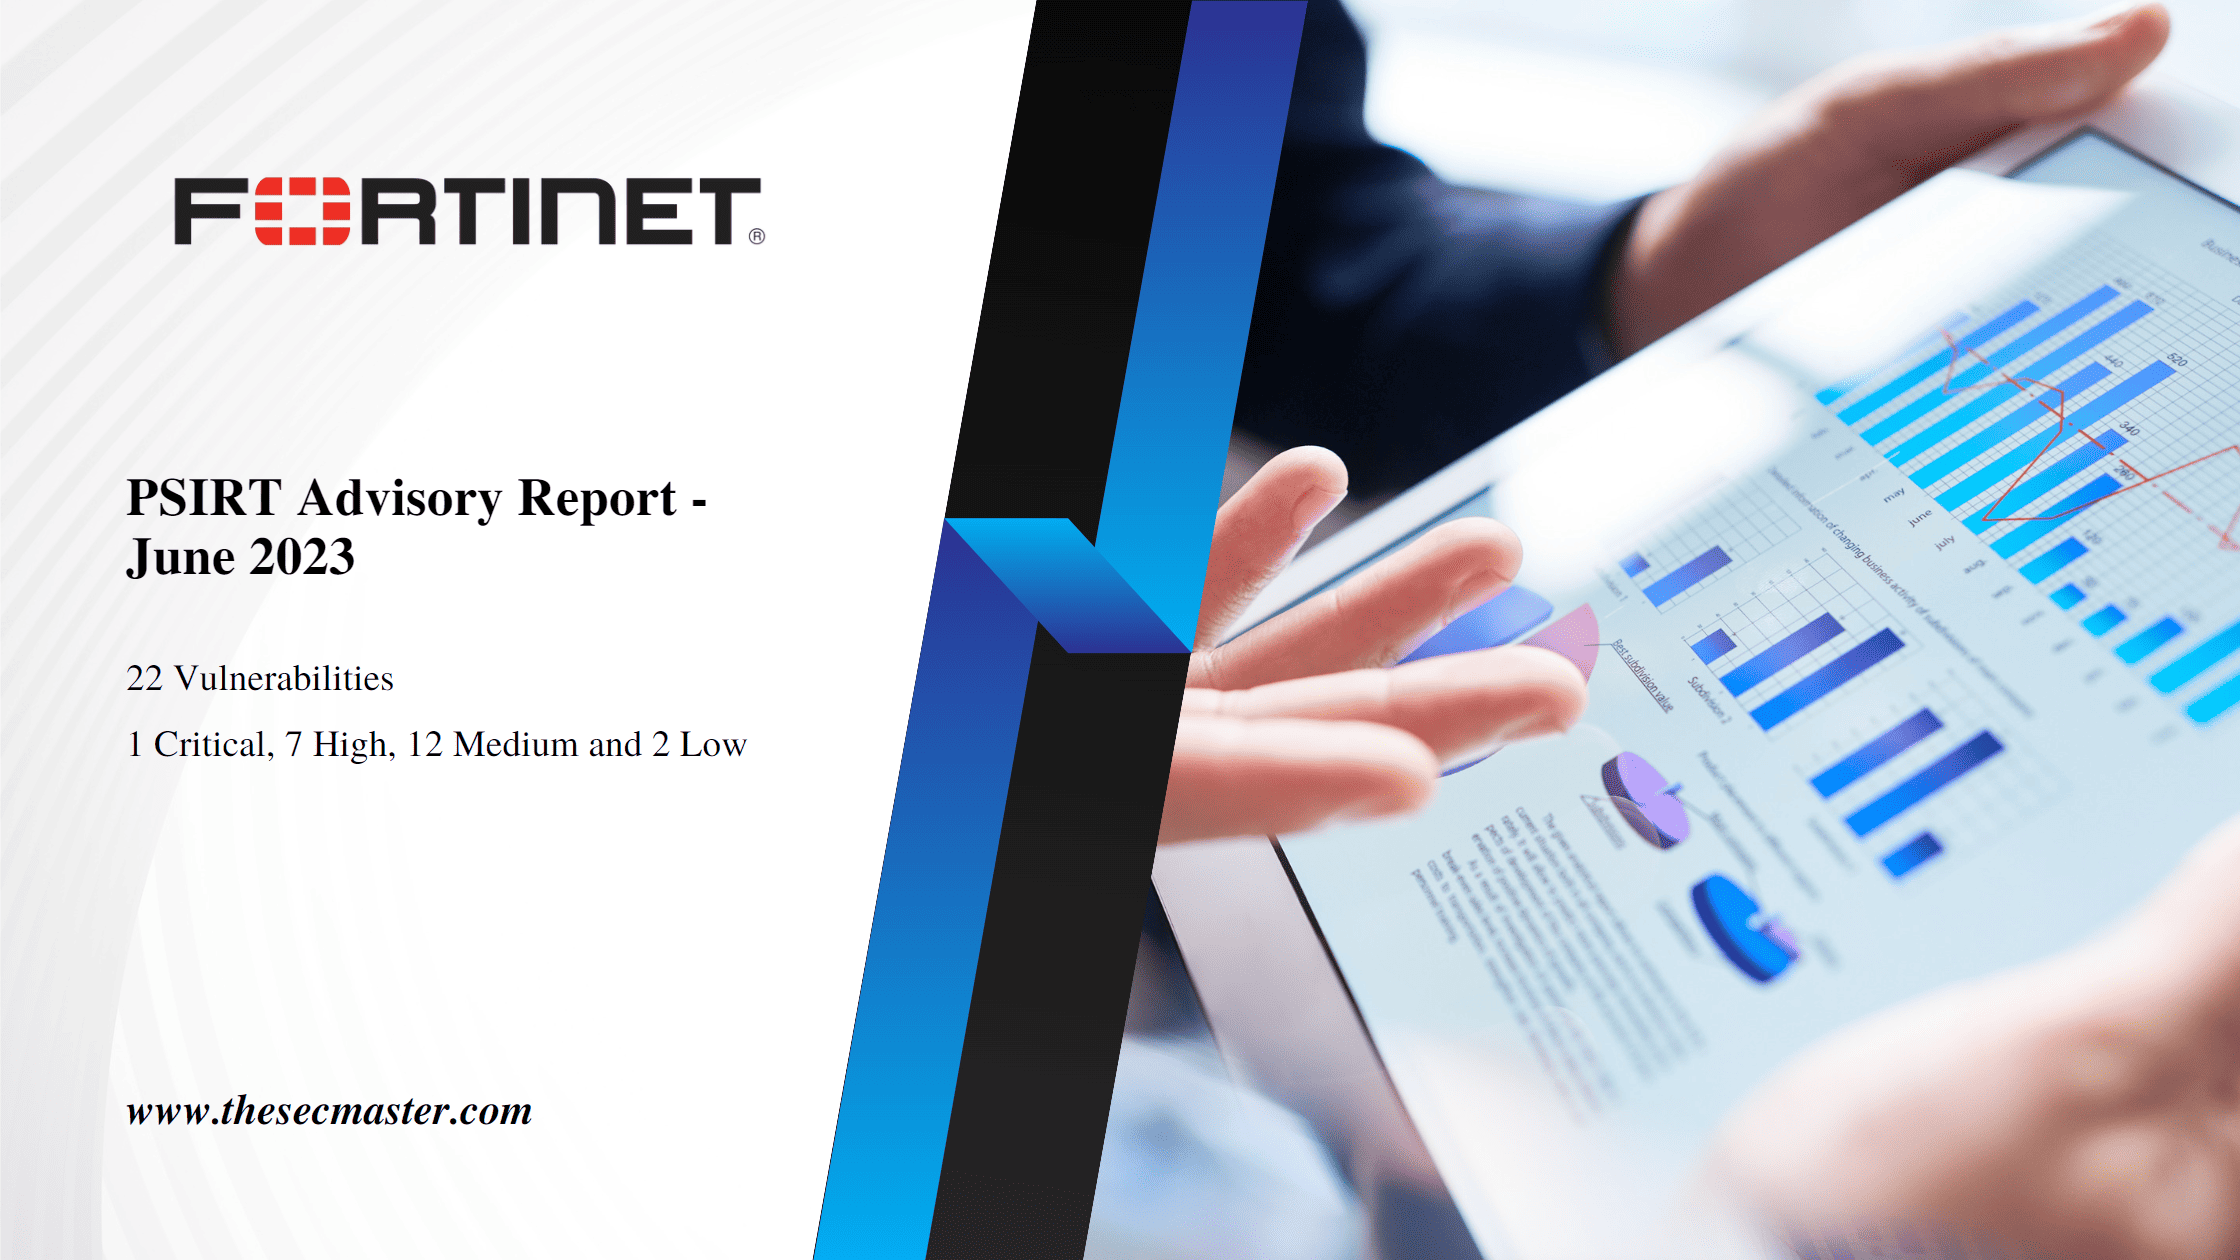 Breaking Down The Latest June 2023 Monthly Psirt Advisory Report From Fortinet